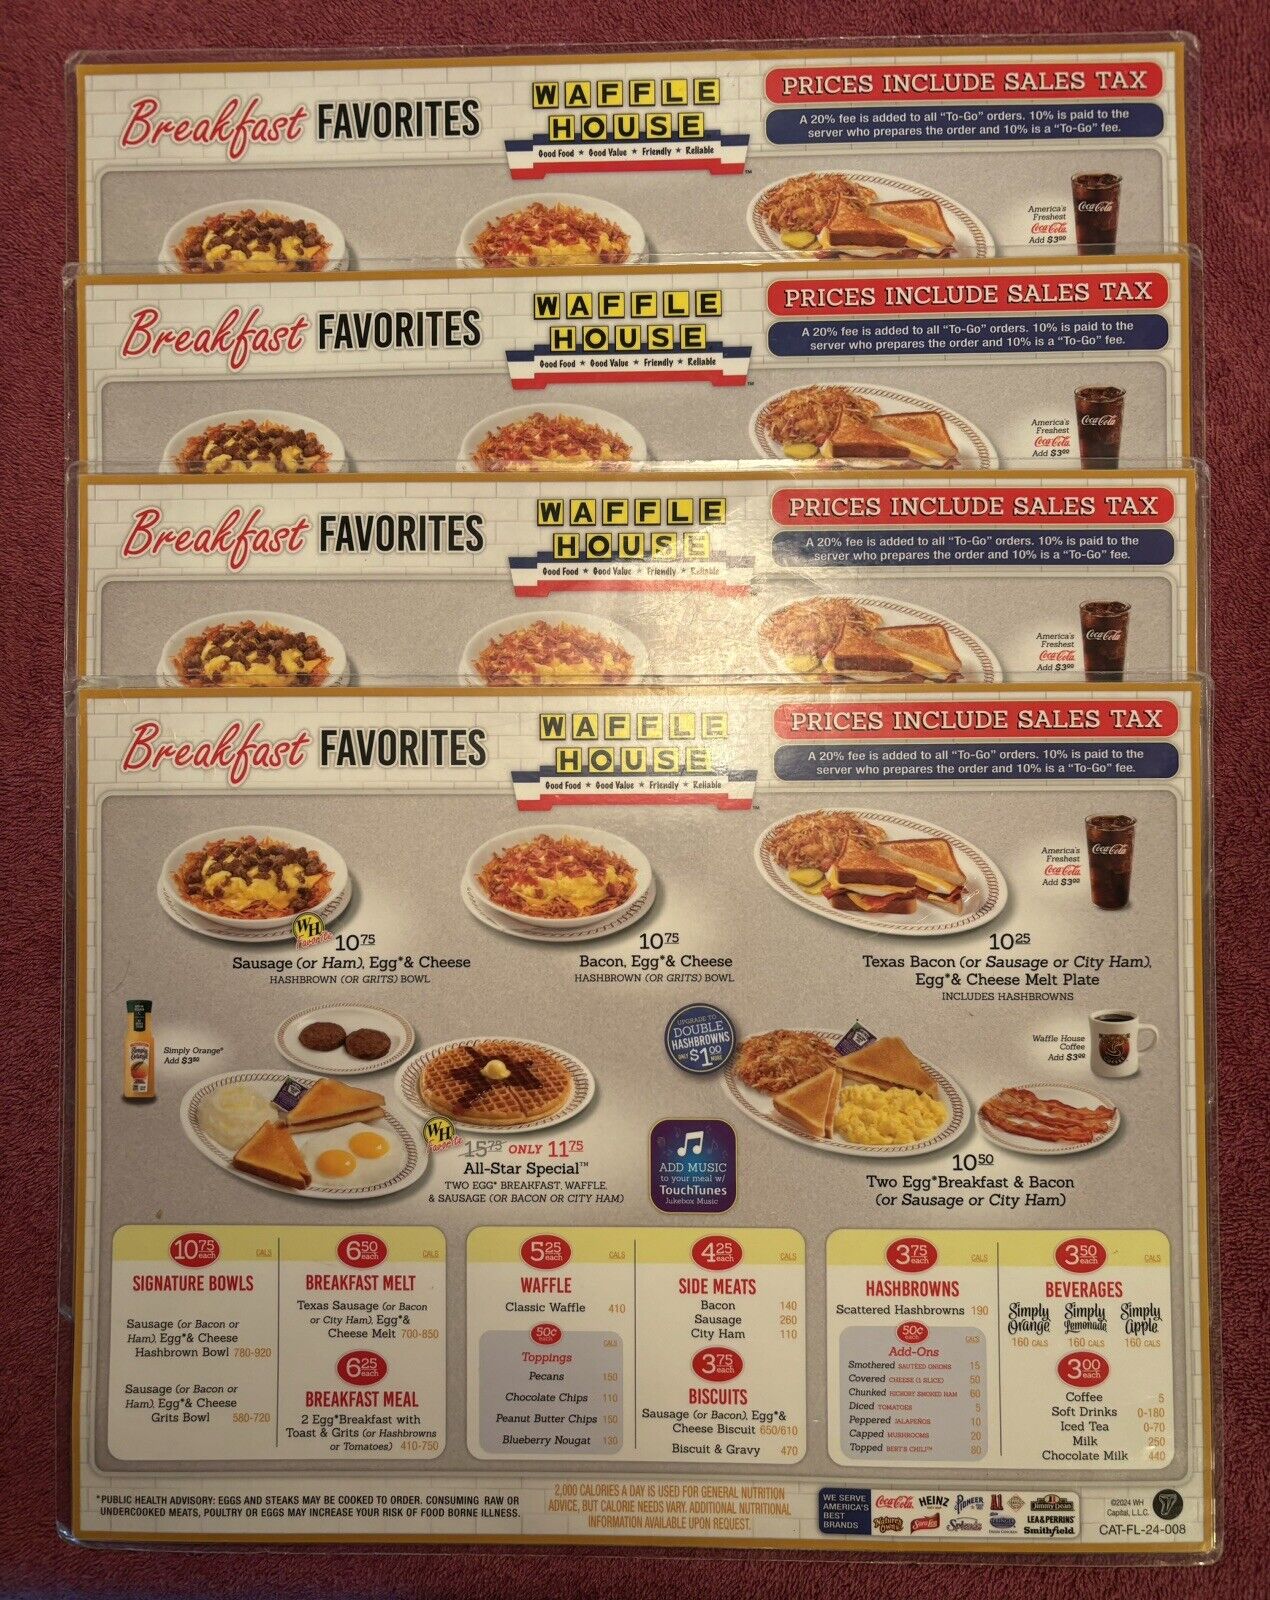 WAFFLE HOUSE MENUS, set of 4, ORIGINAL AND IN VG CONDITION 